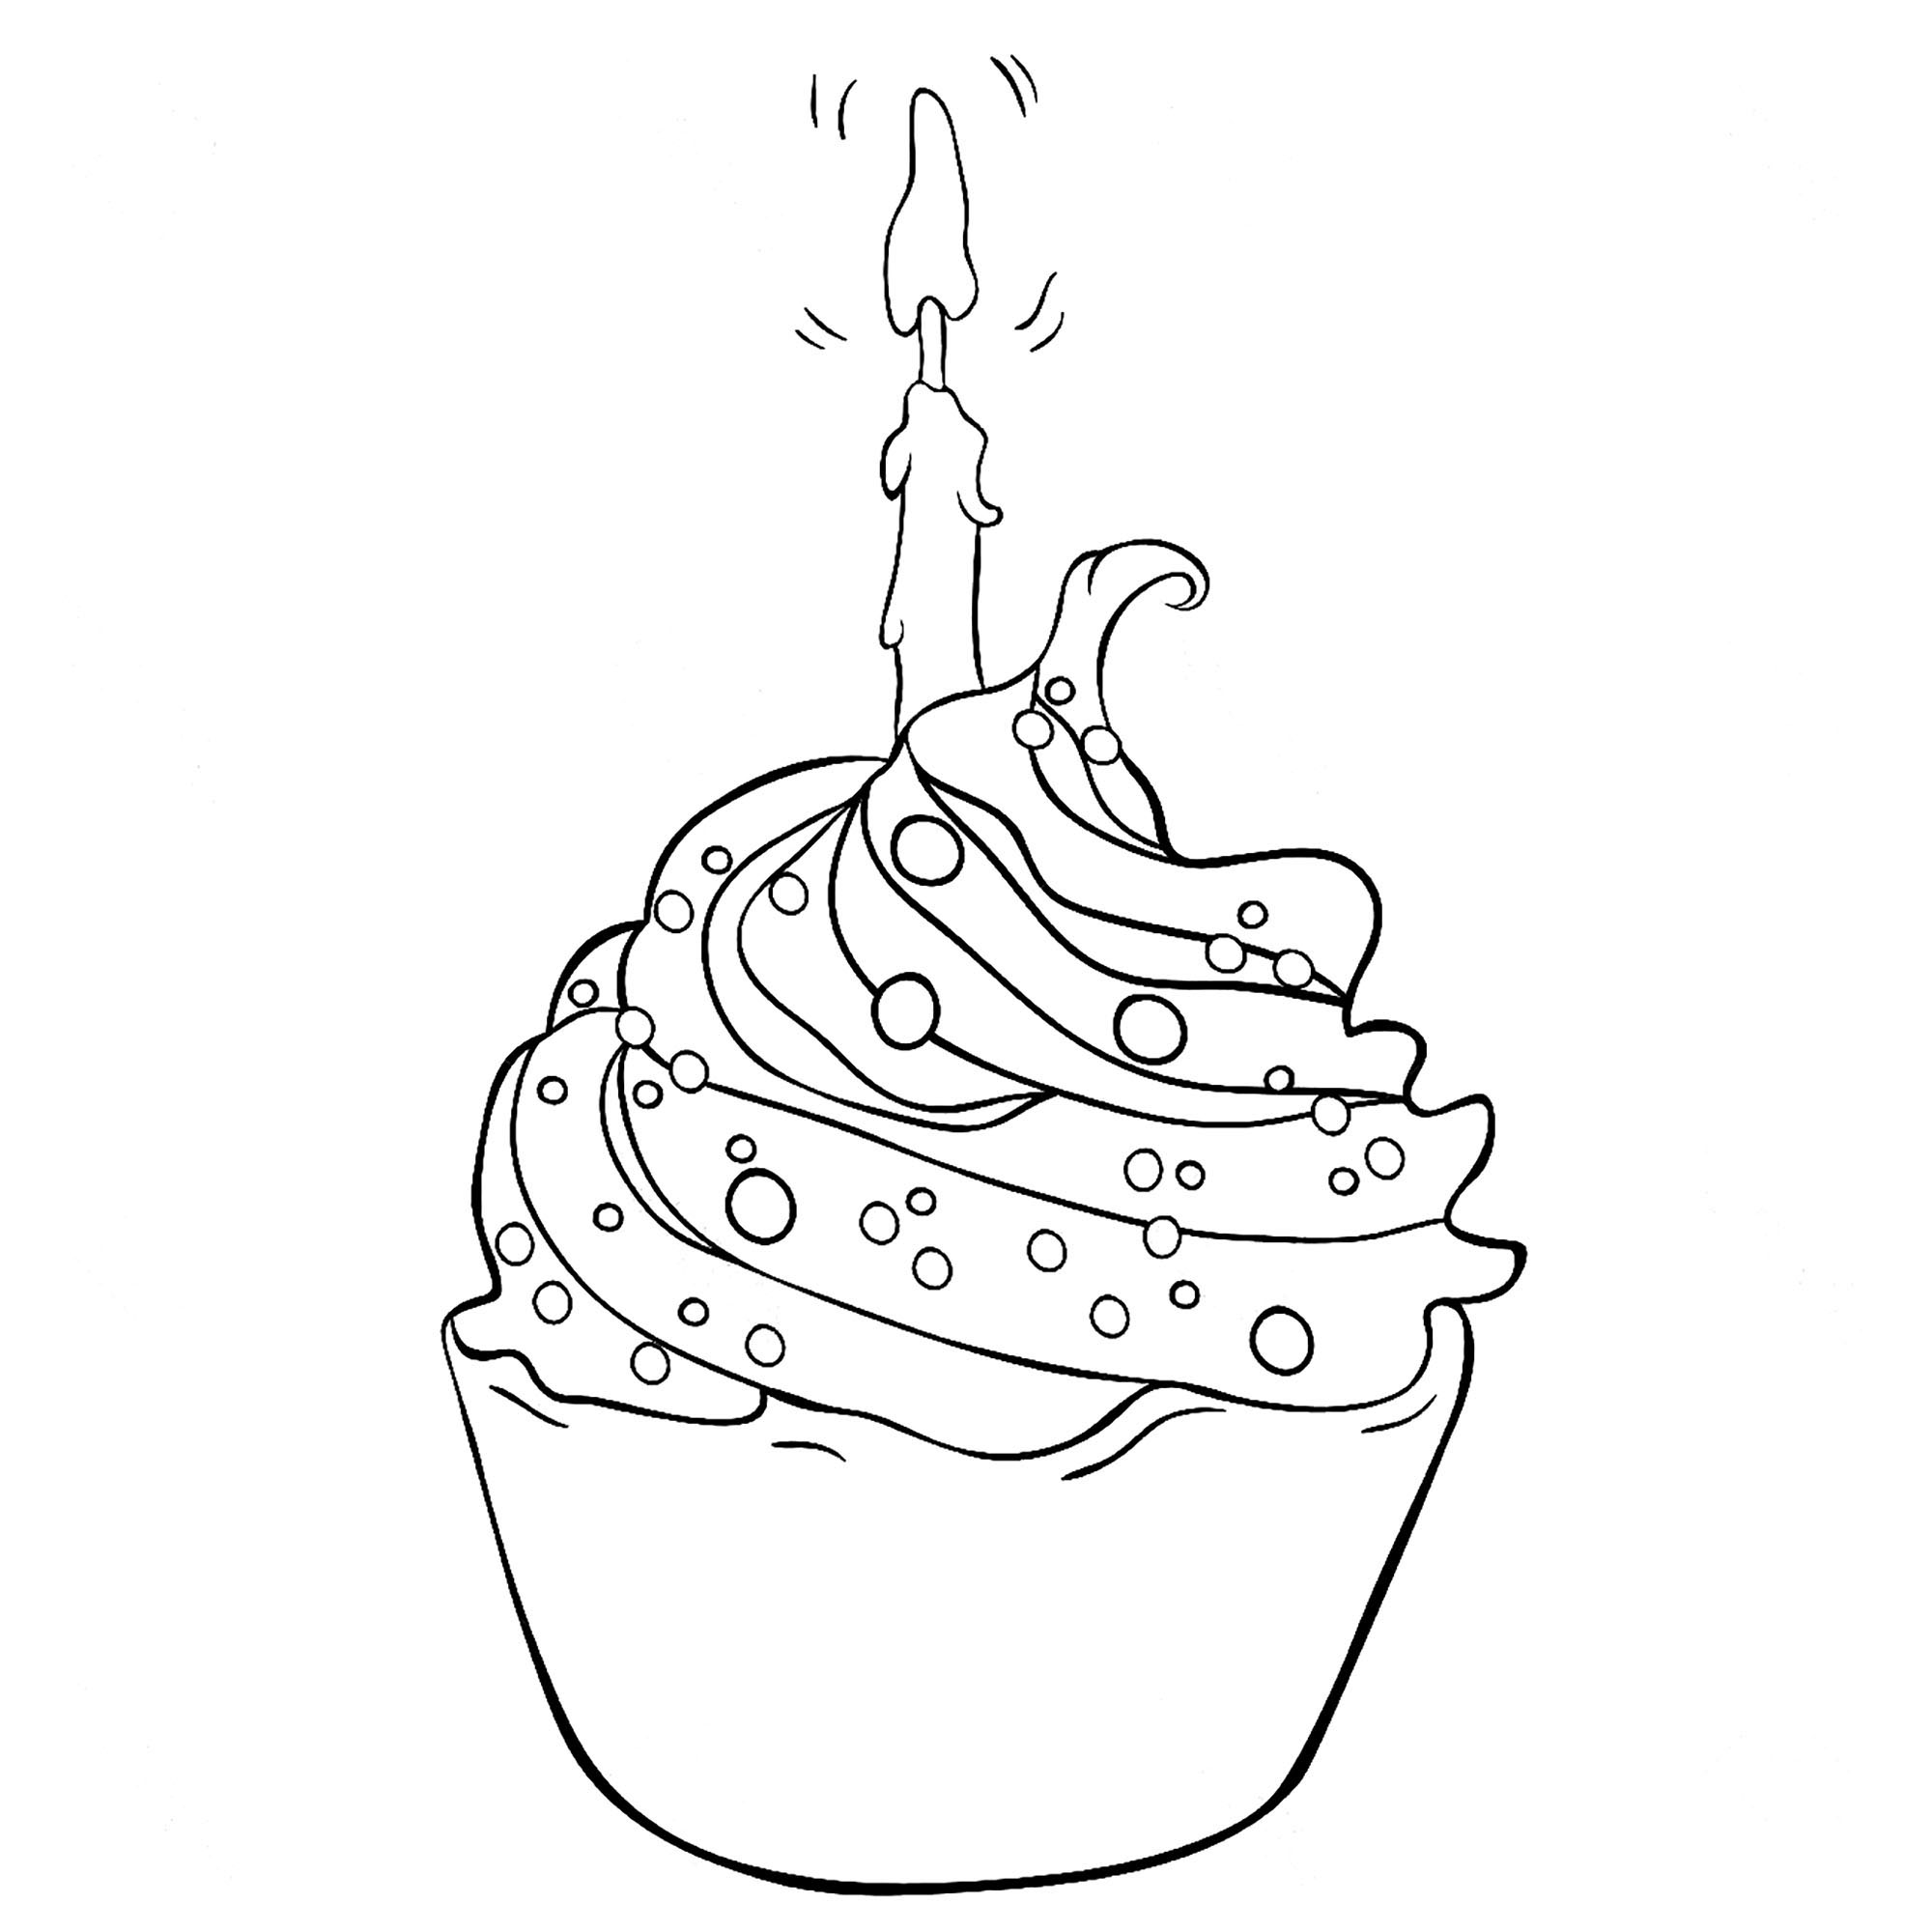 Cupcakes And Cakes To Download Cupcakes And Cakes Kids Coloring Pages